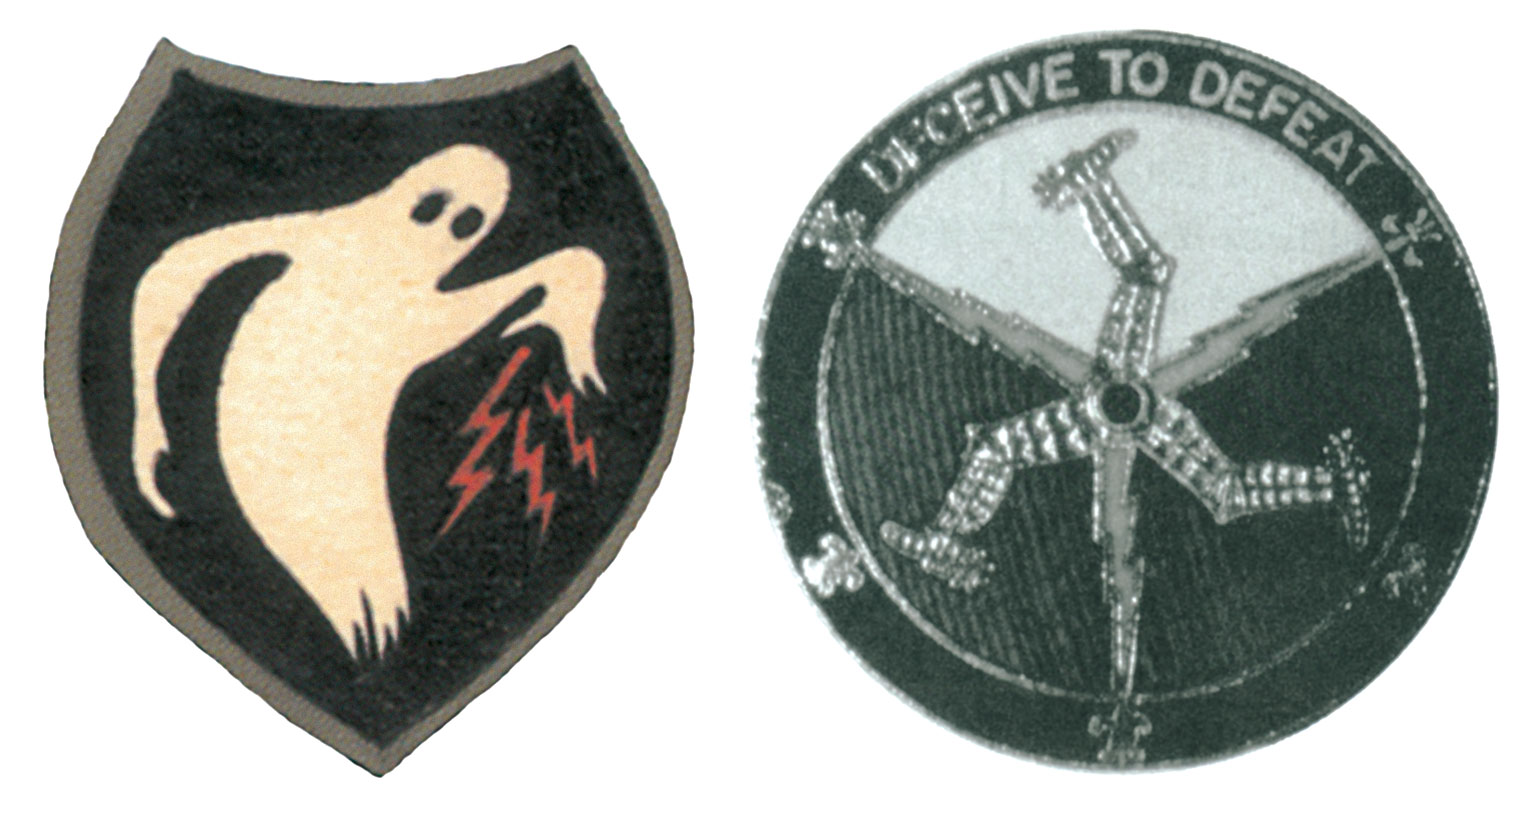 Two unauthorized insignias, one depicting a ghost and the other, machinery, designed by men of the 23rd Special Troops.